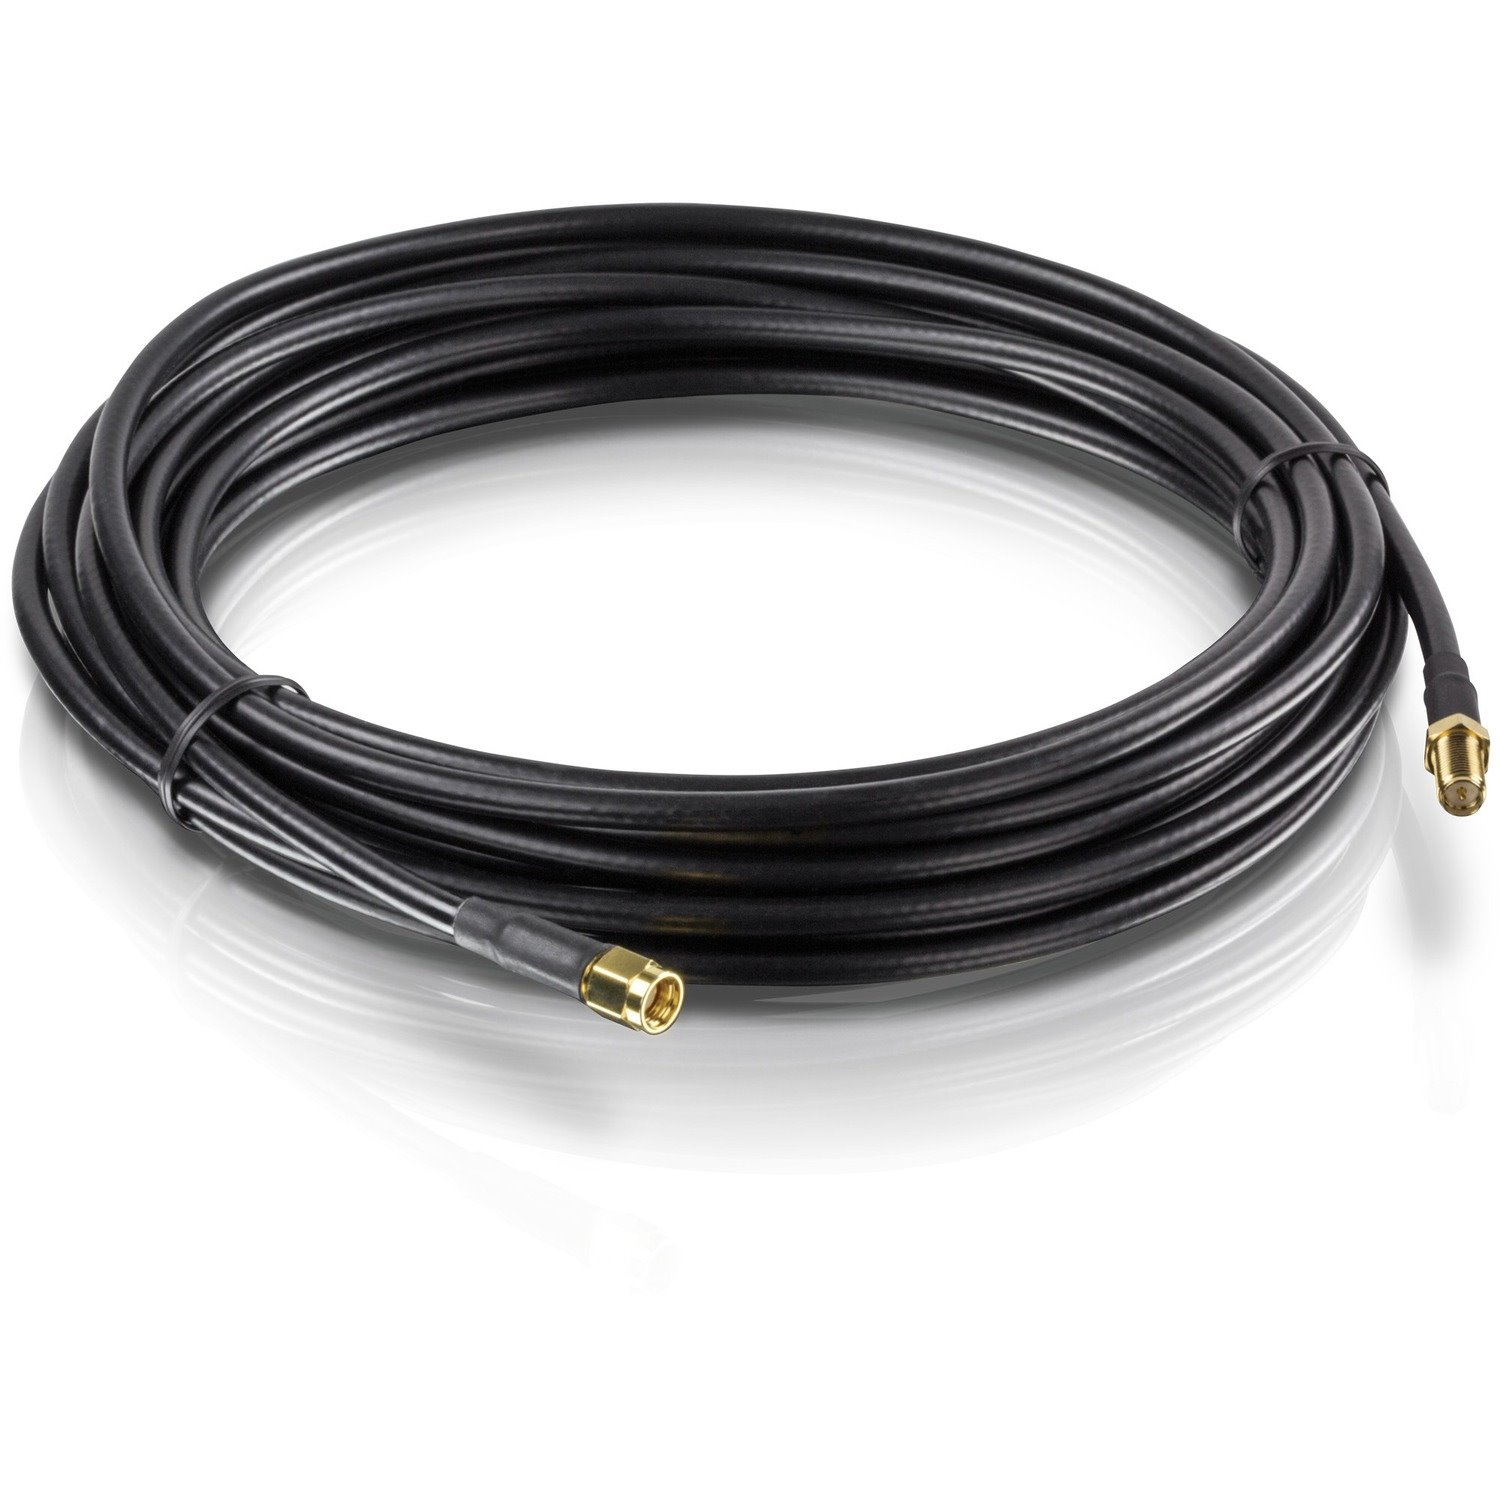 TRENDnet Low Loss RP-SMA Male to RP-SMA Female Antenna Cable - 6m (19.6 ft.)